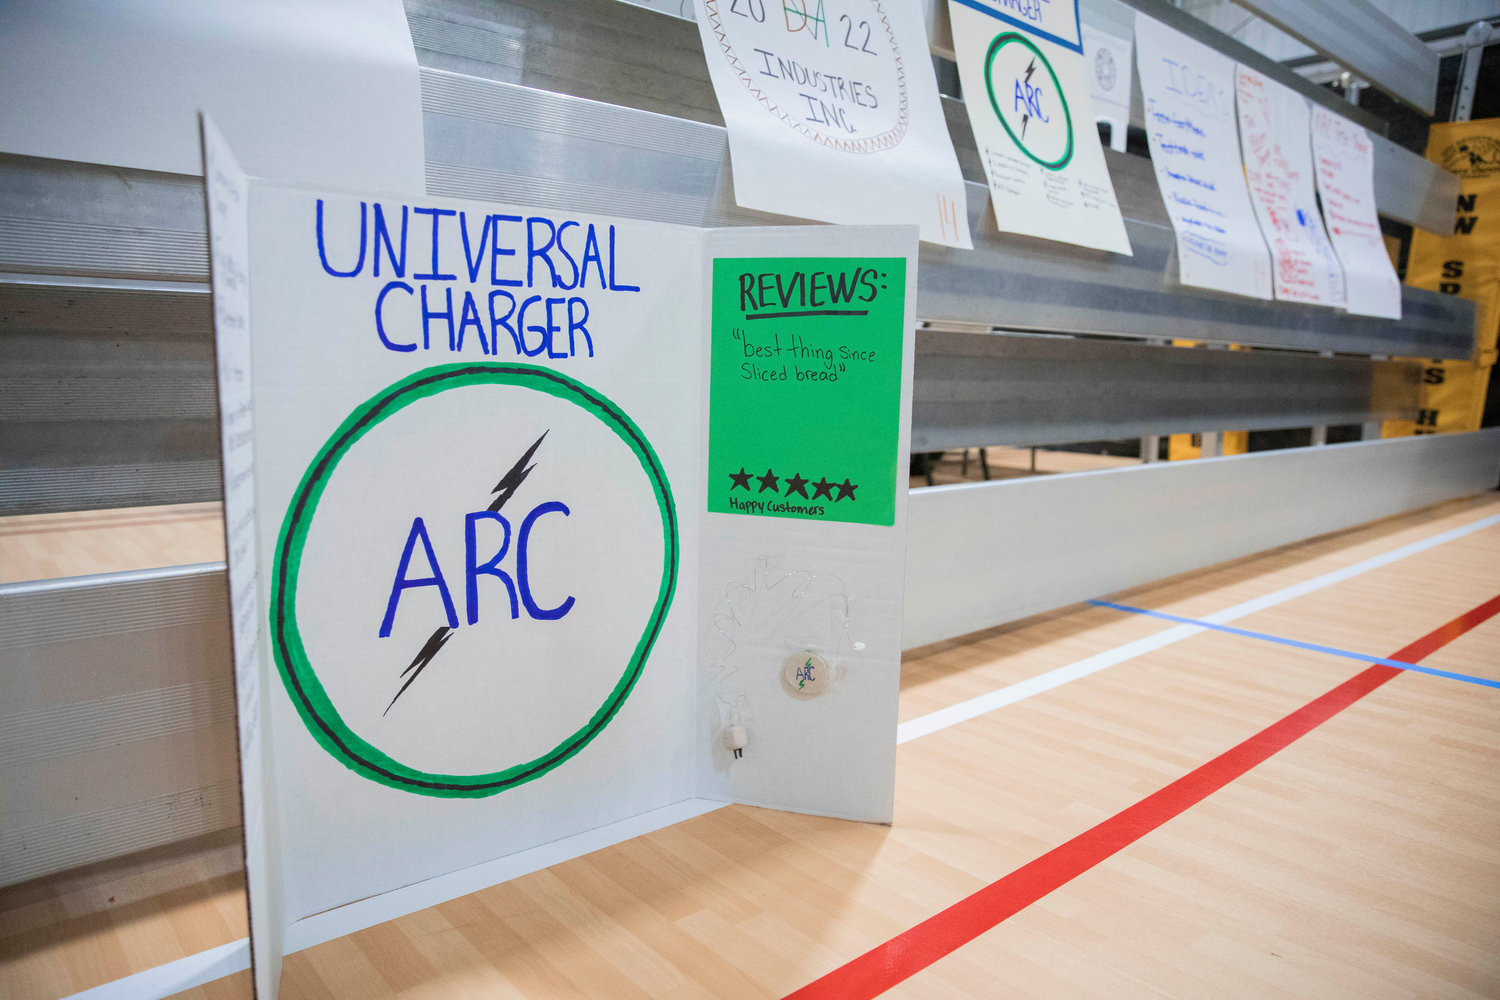 A poster sits on display for a universal charger during Washington Business Week at the Northwest Sports Hub in Centralia.